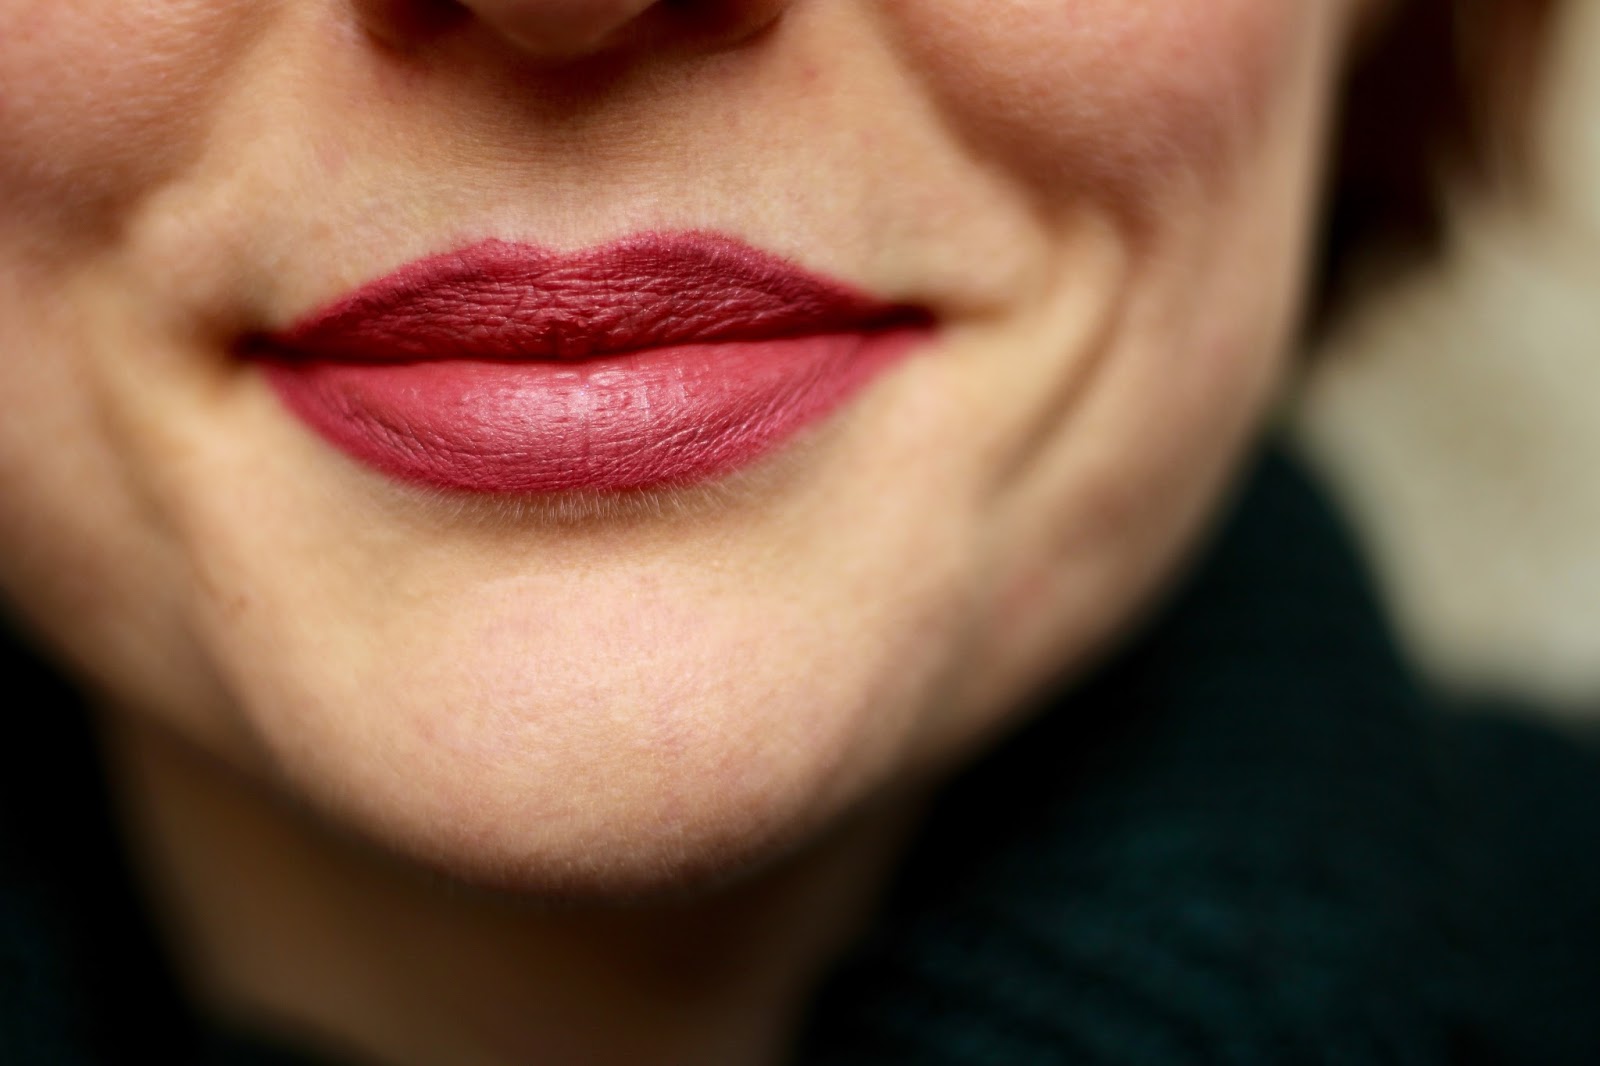 Does overlining your lips REALLY work? Beauty over 40.